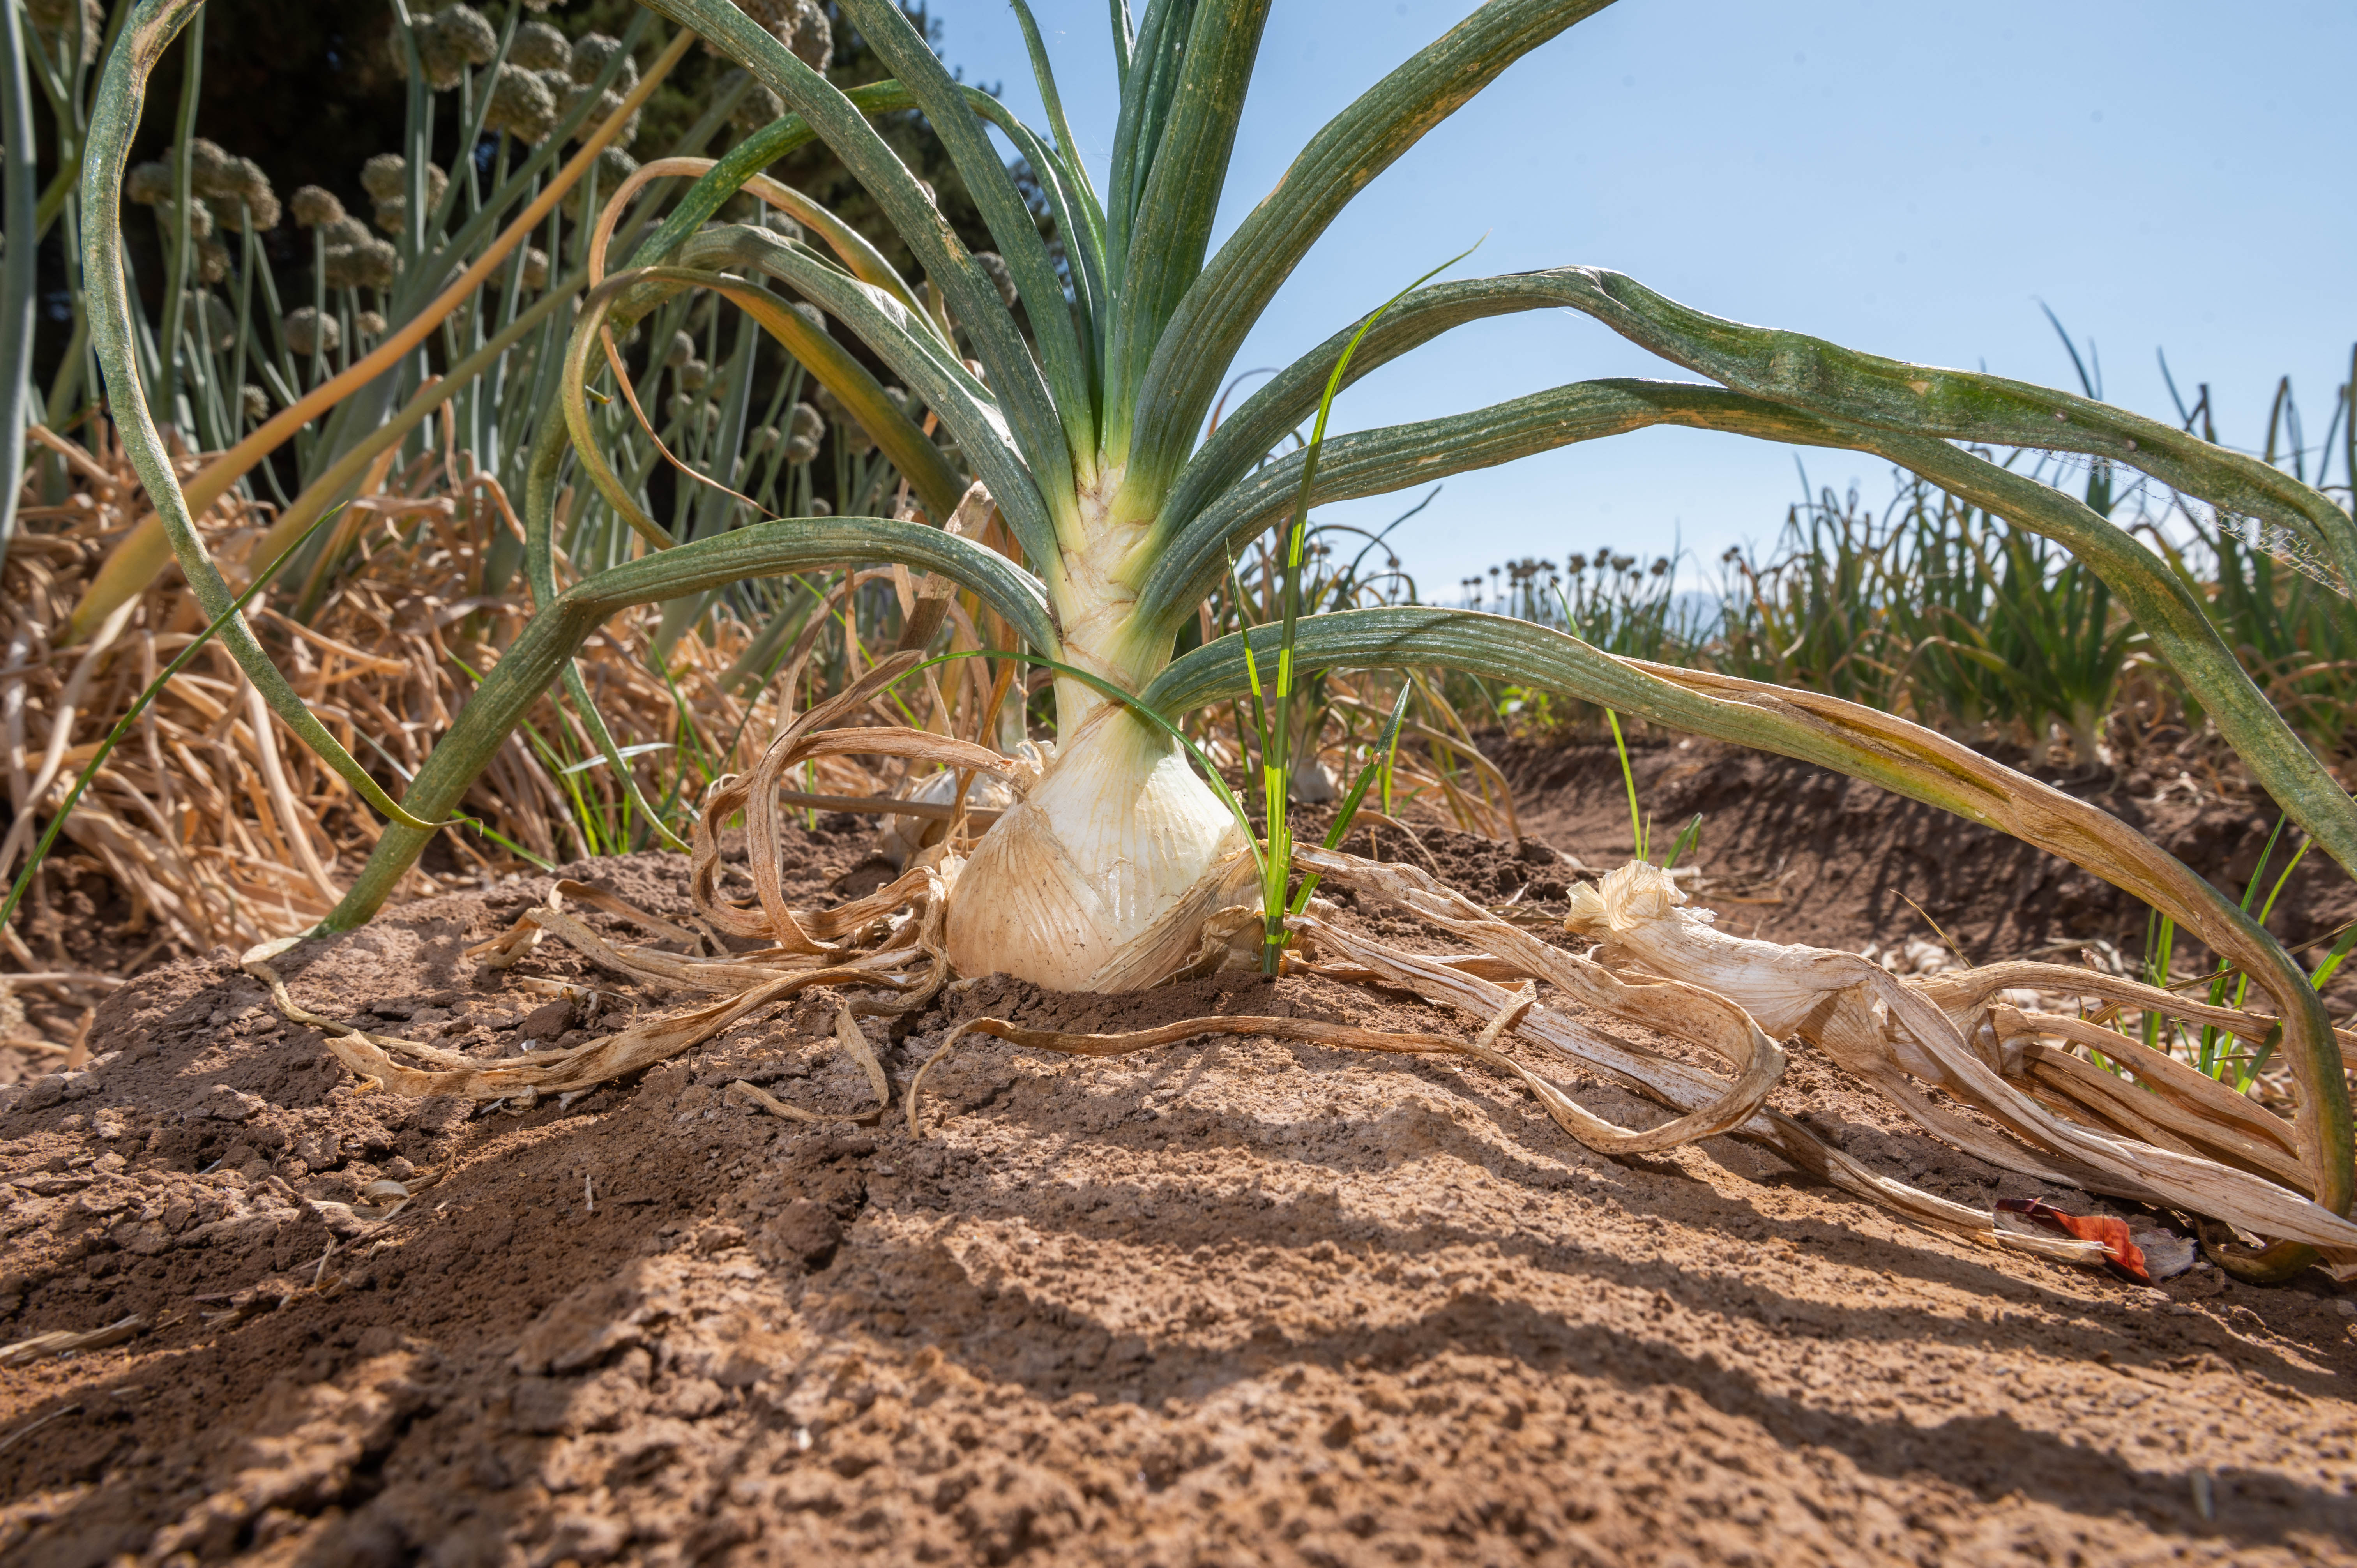 At New Mexico State University, researchers with the onion breeding program explore ways of developing the best onions, which are the basis of most recipes. On June 29, the public will have a chance to learn more about that research during this year’s onion field day at the Fabián García Science Center, (NMSU photo by Josh Bachman)